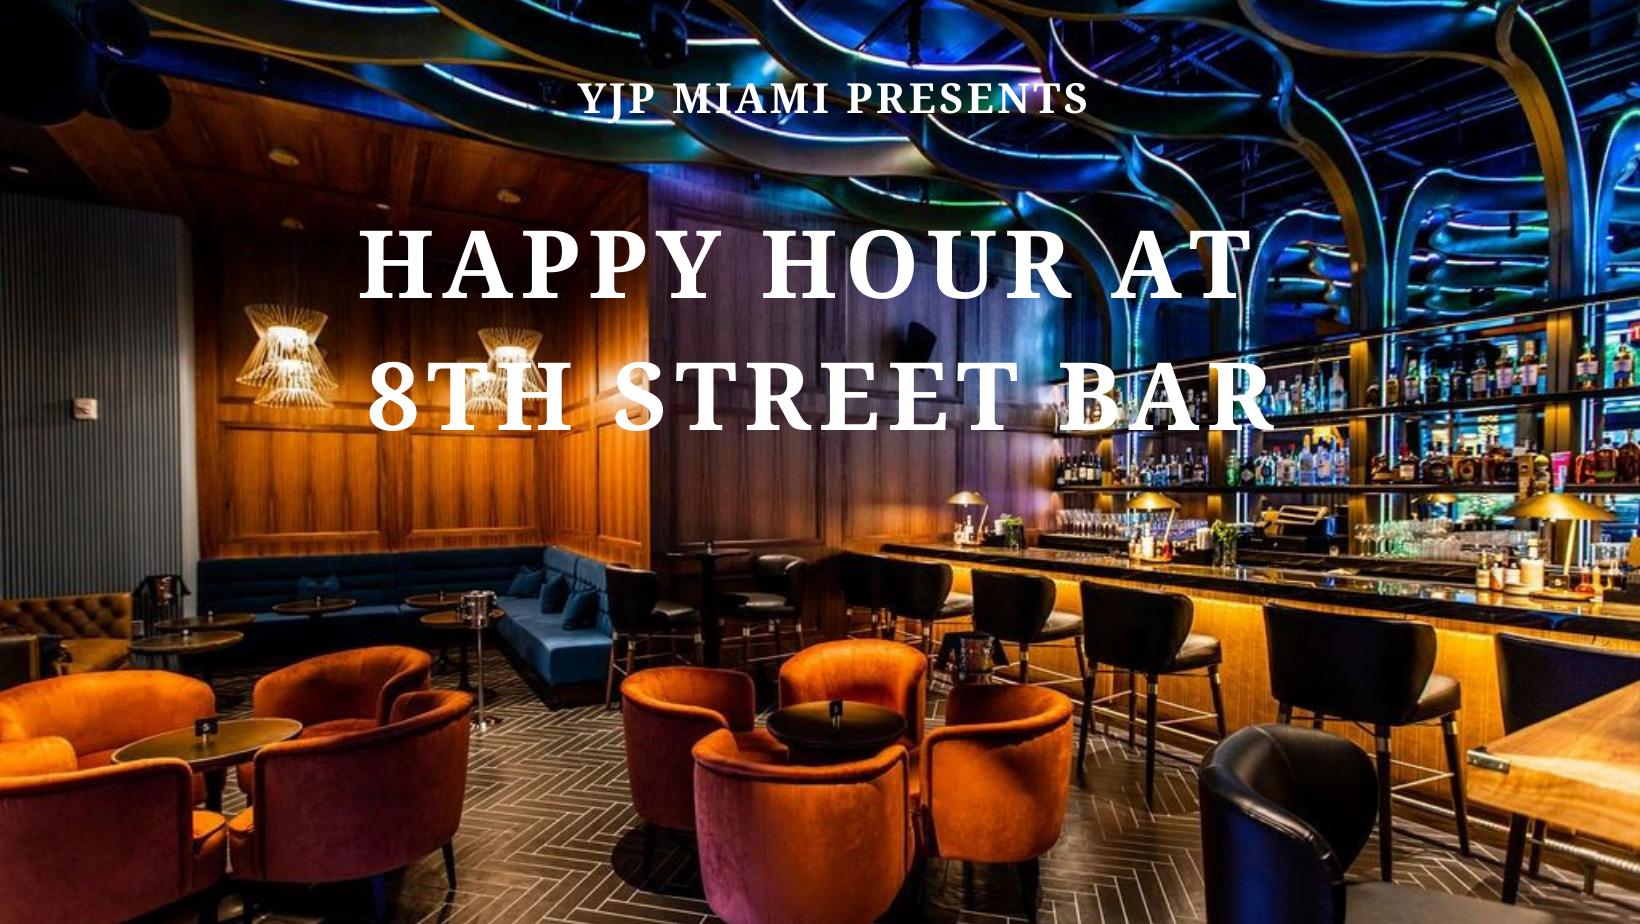 Happy Hour at 8th Street Bar